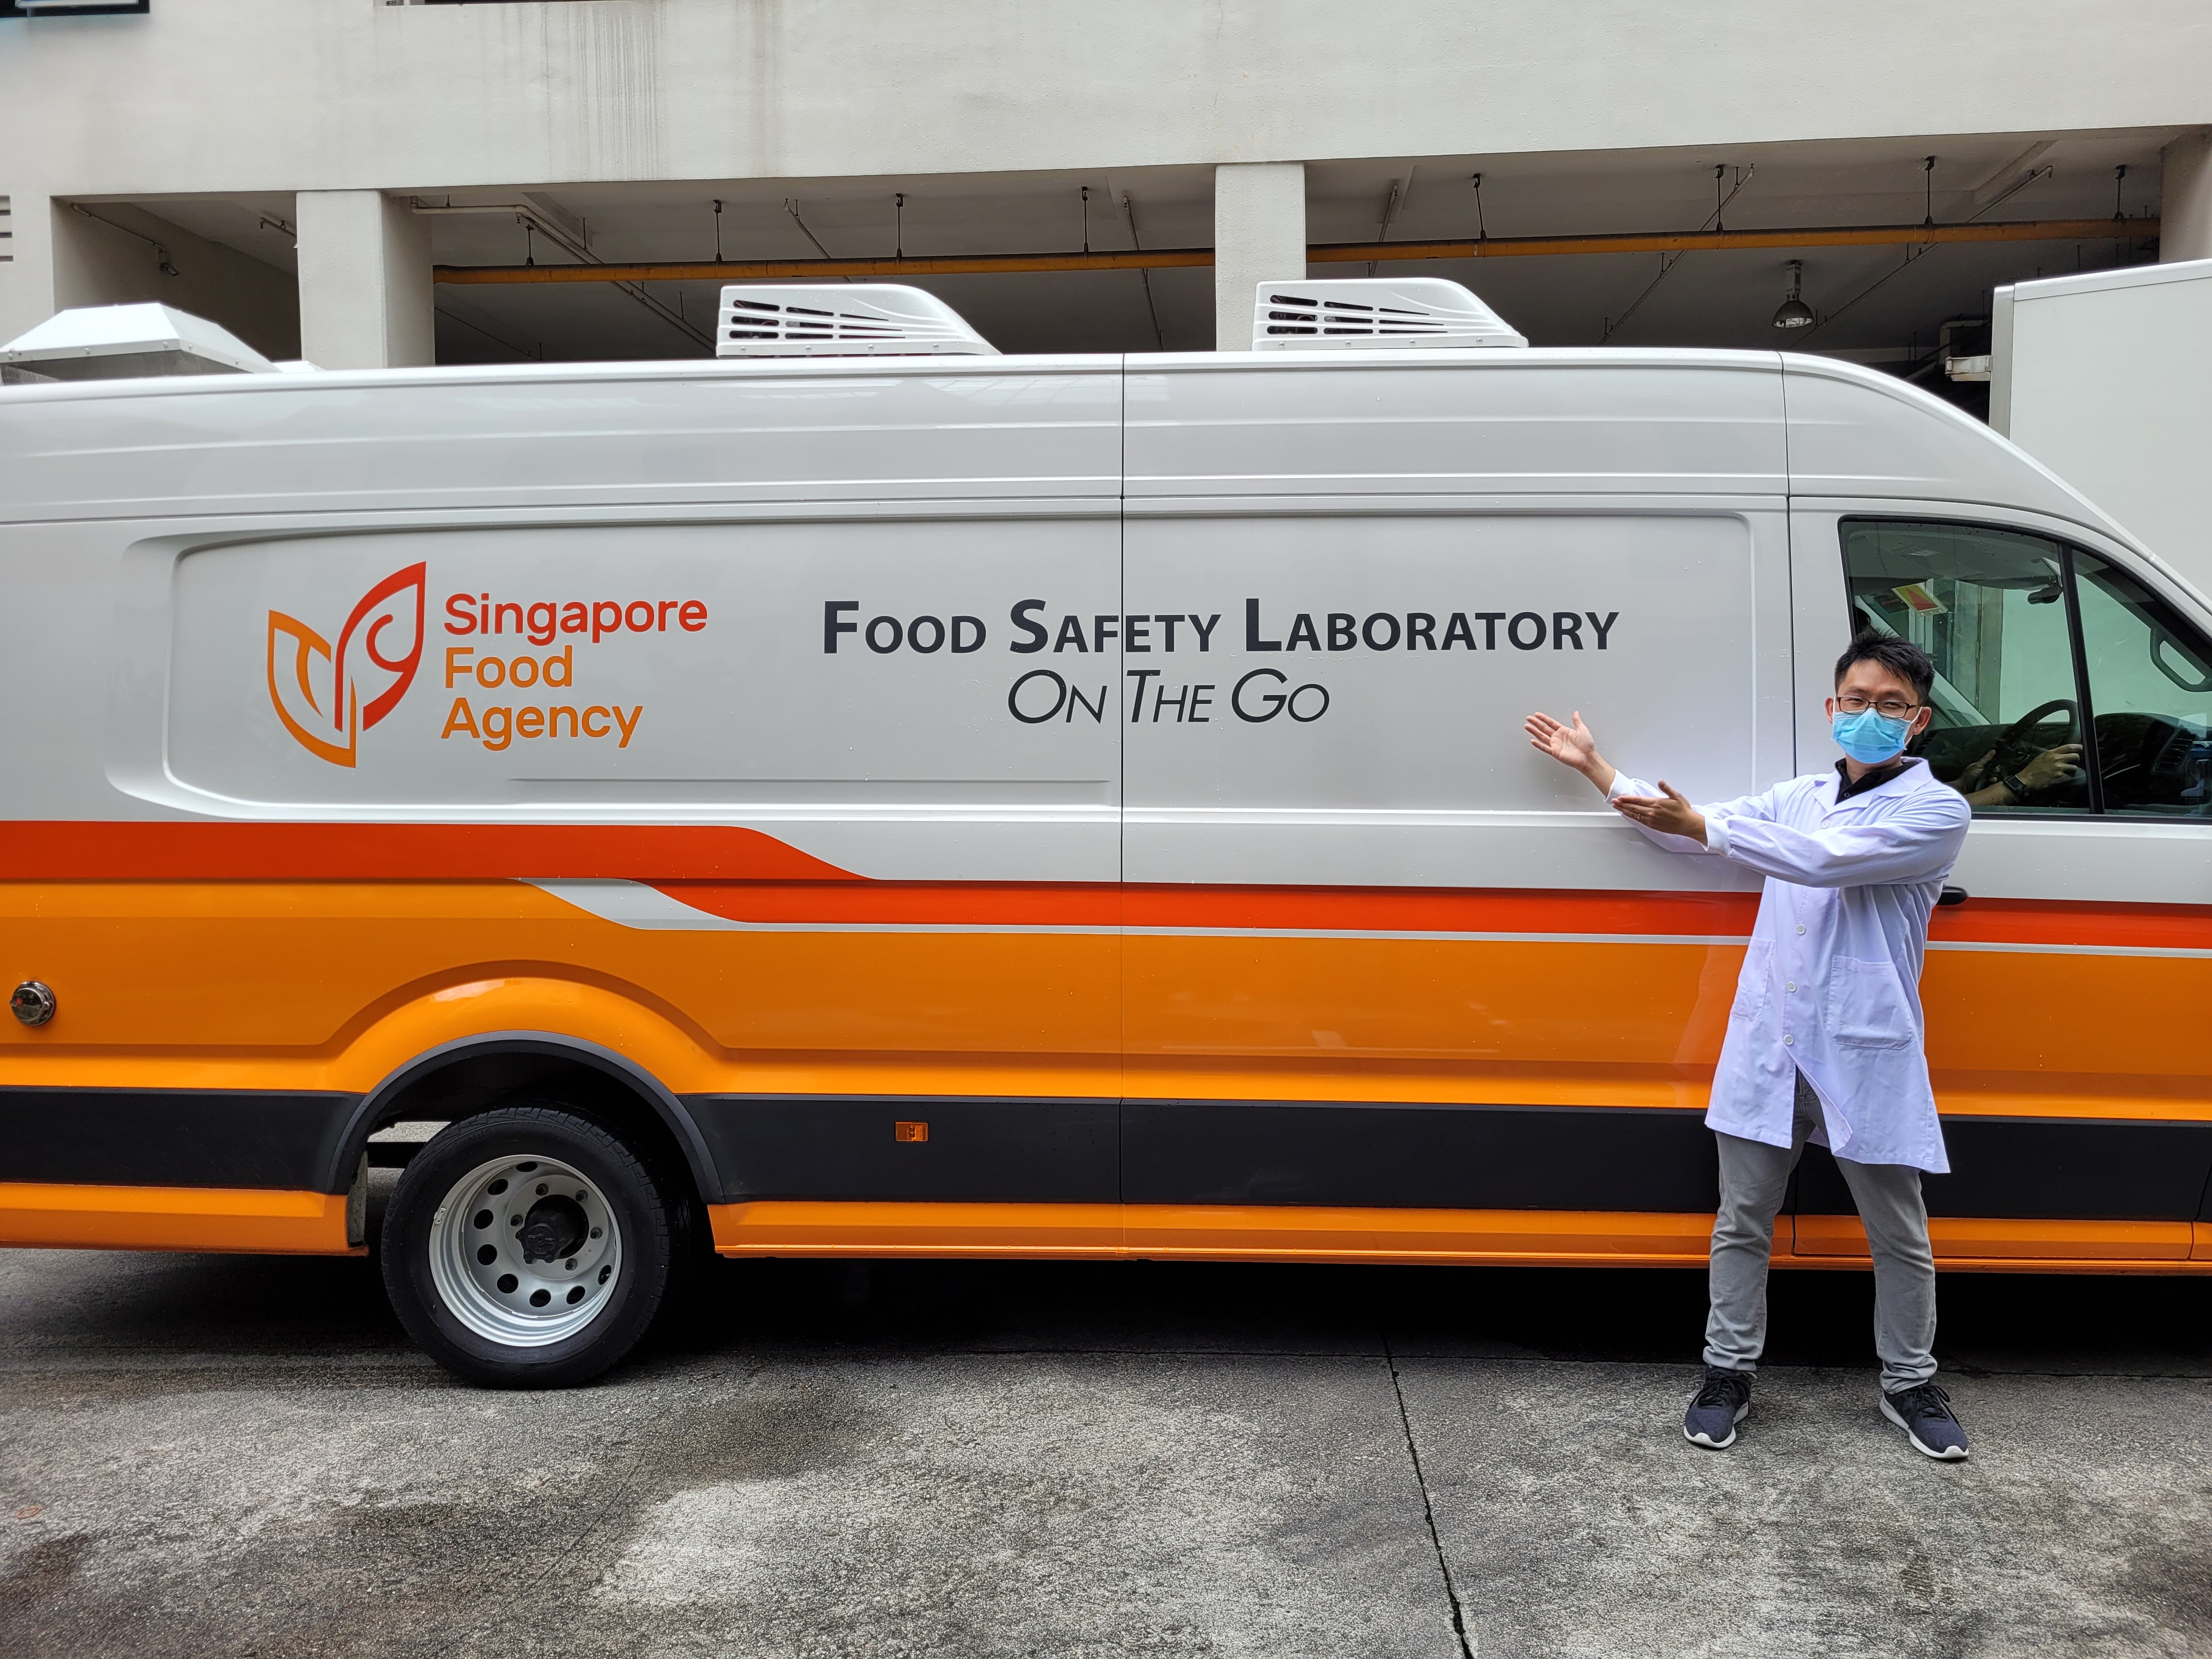 SFA's mobile lab is equipped with advanced food testing and diagnostic technologies